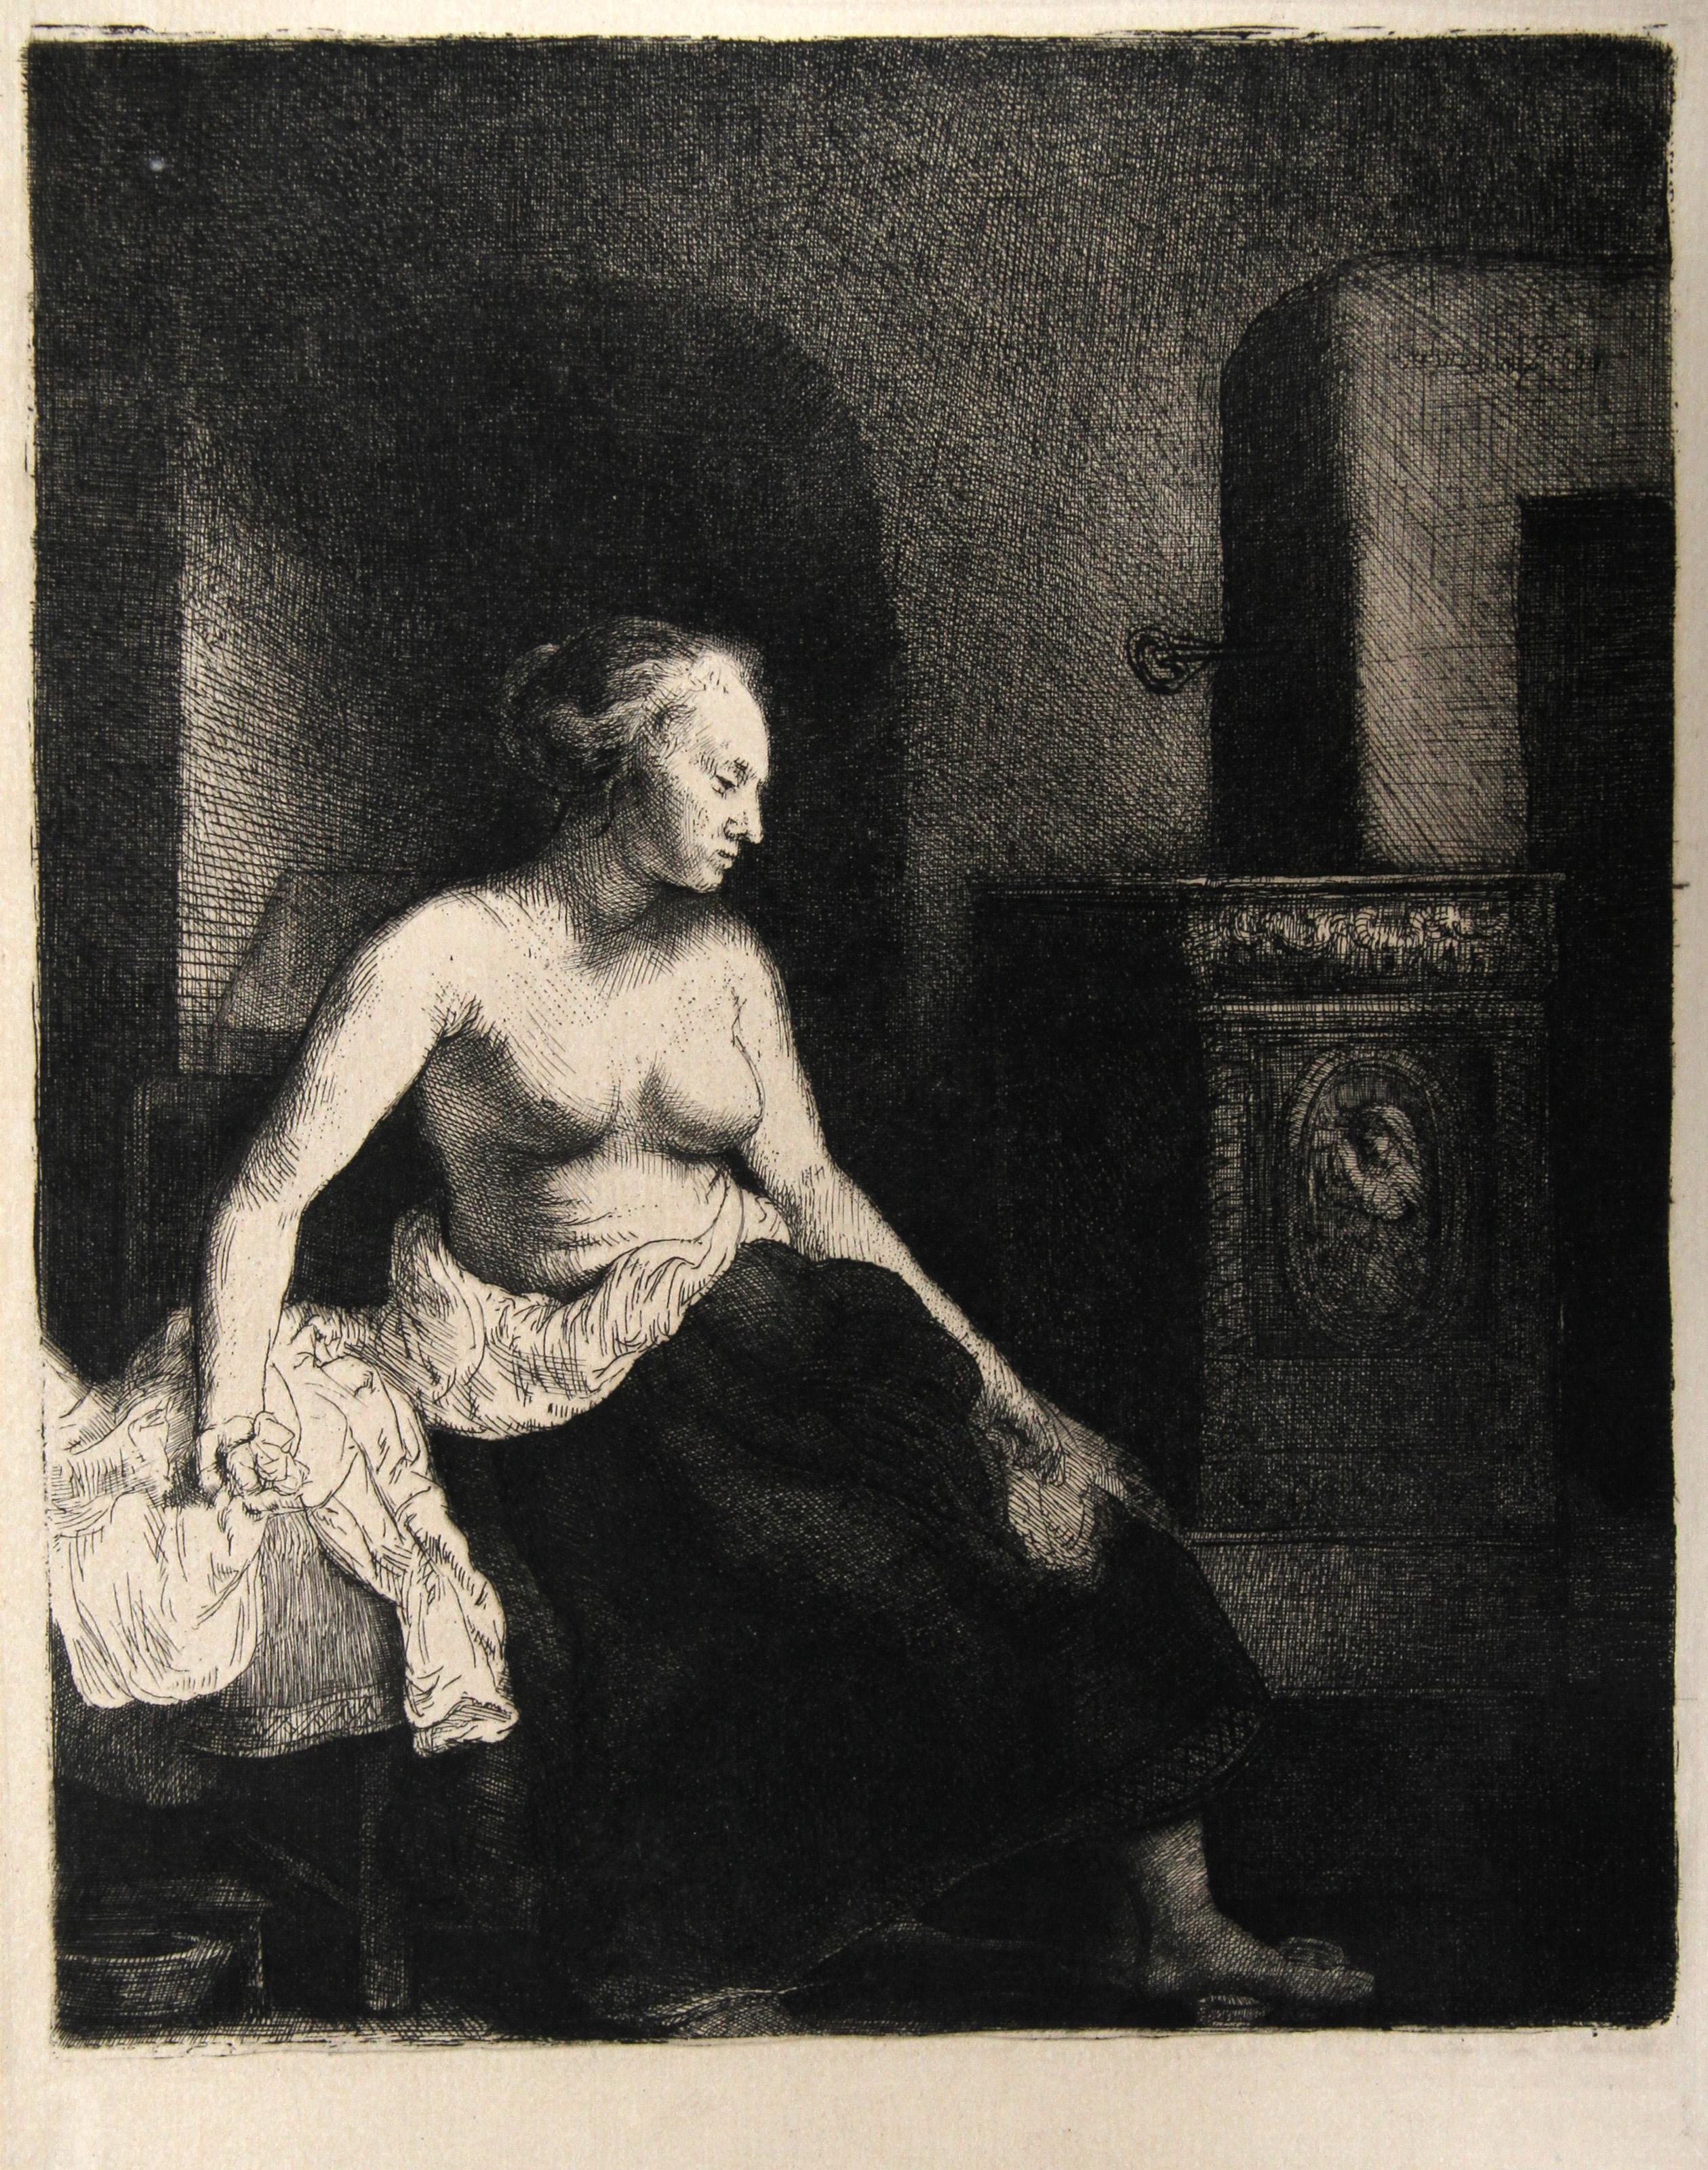 Artist: Rembrandt van Rijn, After by Amand Durand, Dutch (1606 - 1669) -  Woman Seated Beside a Stove  (B197), Year: 1878 (of original 1658), Medium: Heliogravure, Size: 9  x 7.25 in. (22.86  x 18.42 cm), Printer: Amand Durand, Description: French